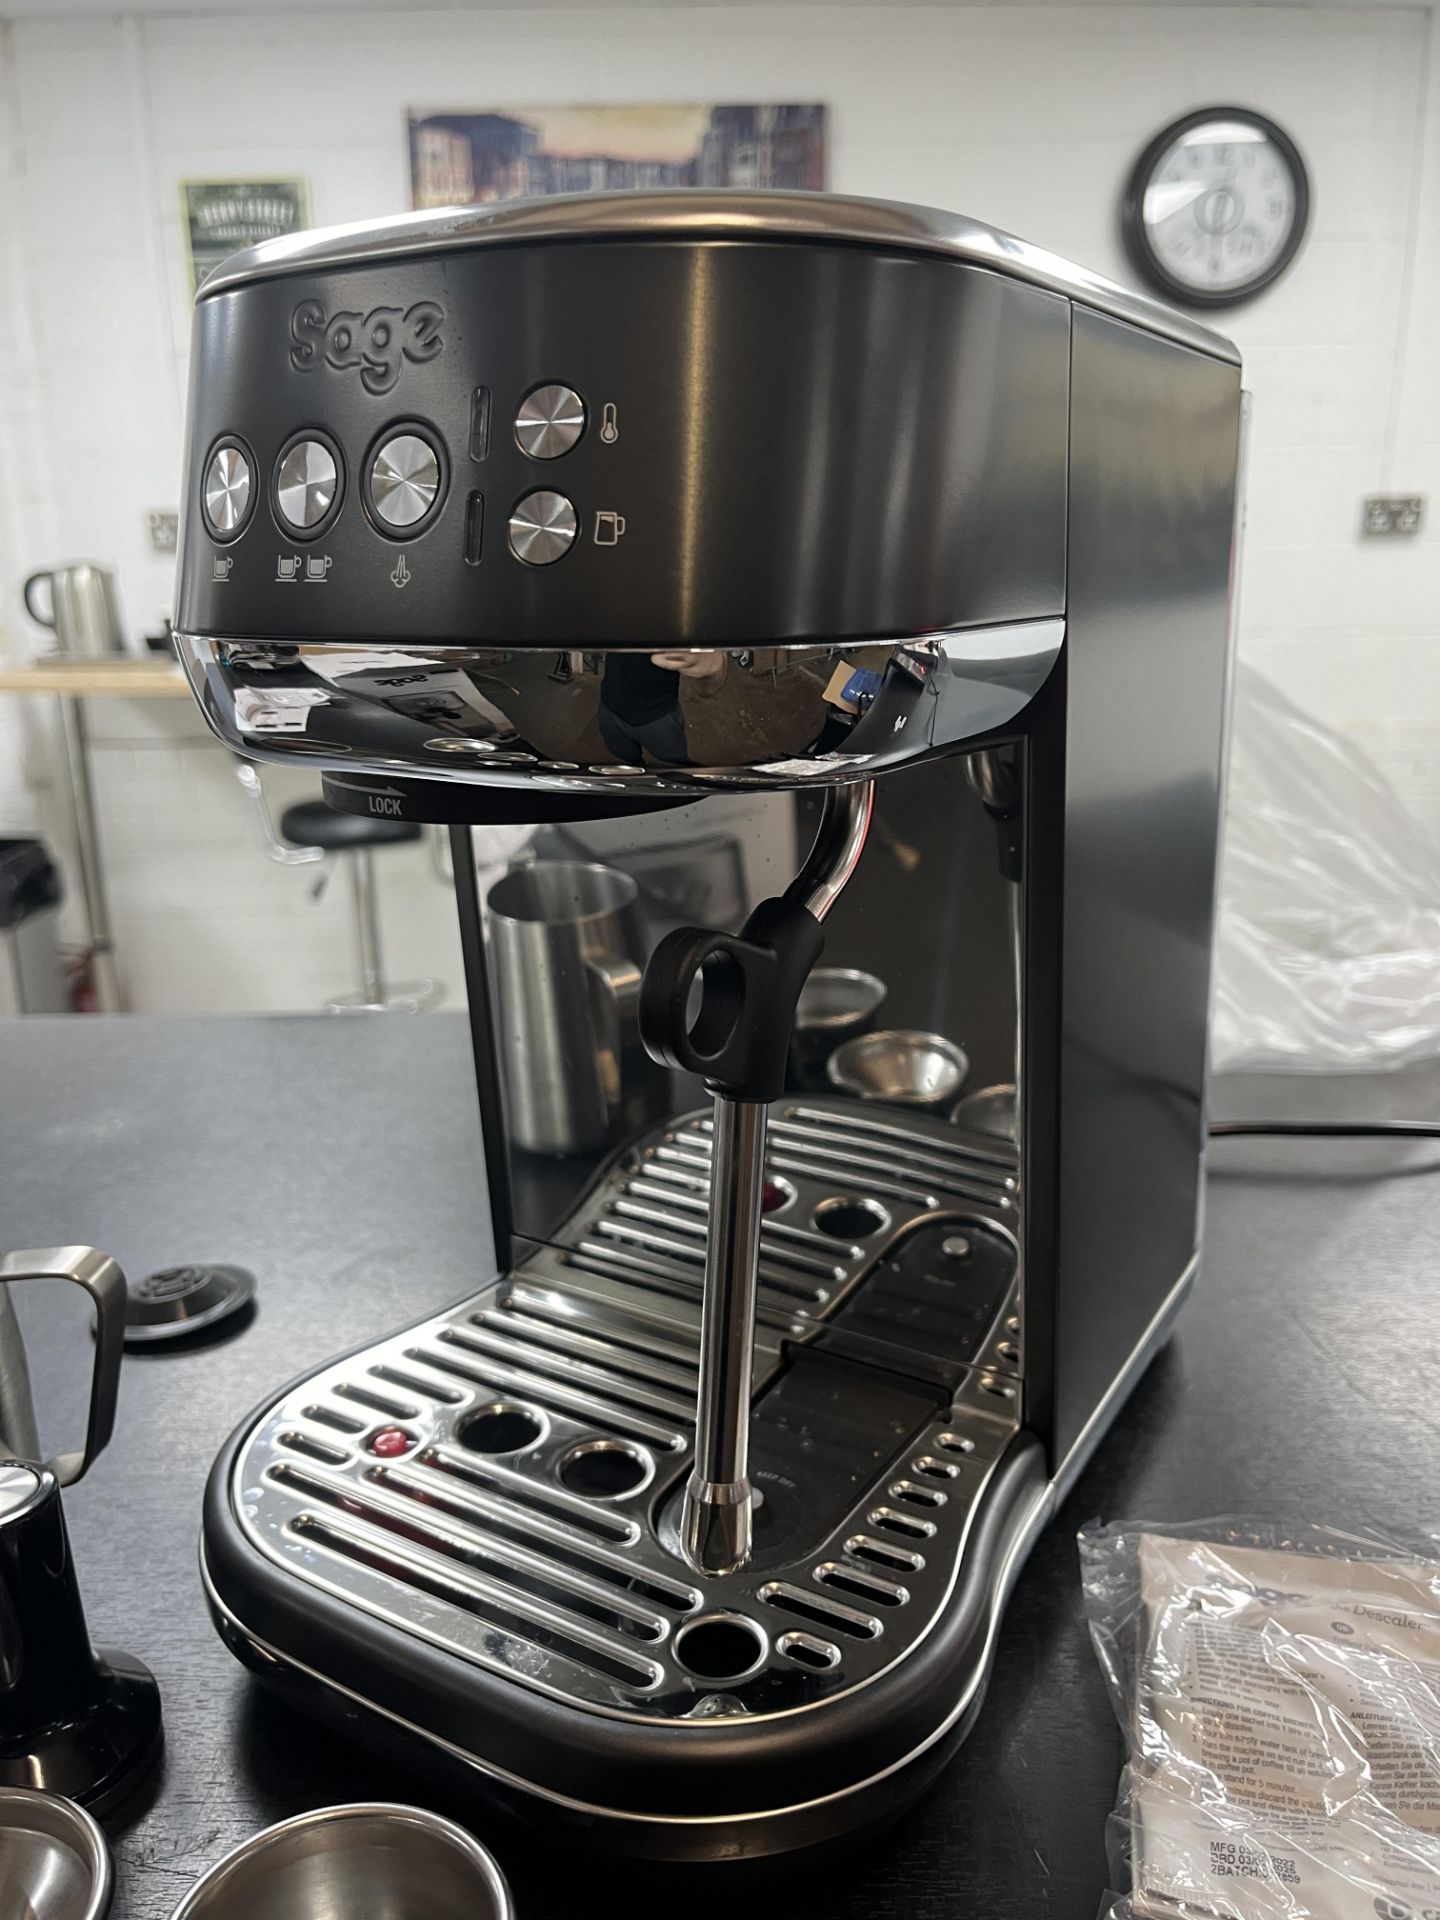 1 BOXED SAGE BAMBINO PLUS PUMP ESPRESSO COFFEE MACHINE IN BLACK STAINLESS STEEL, SES500BST RRP Â£ - Image 2 of 5